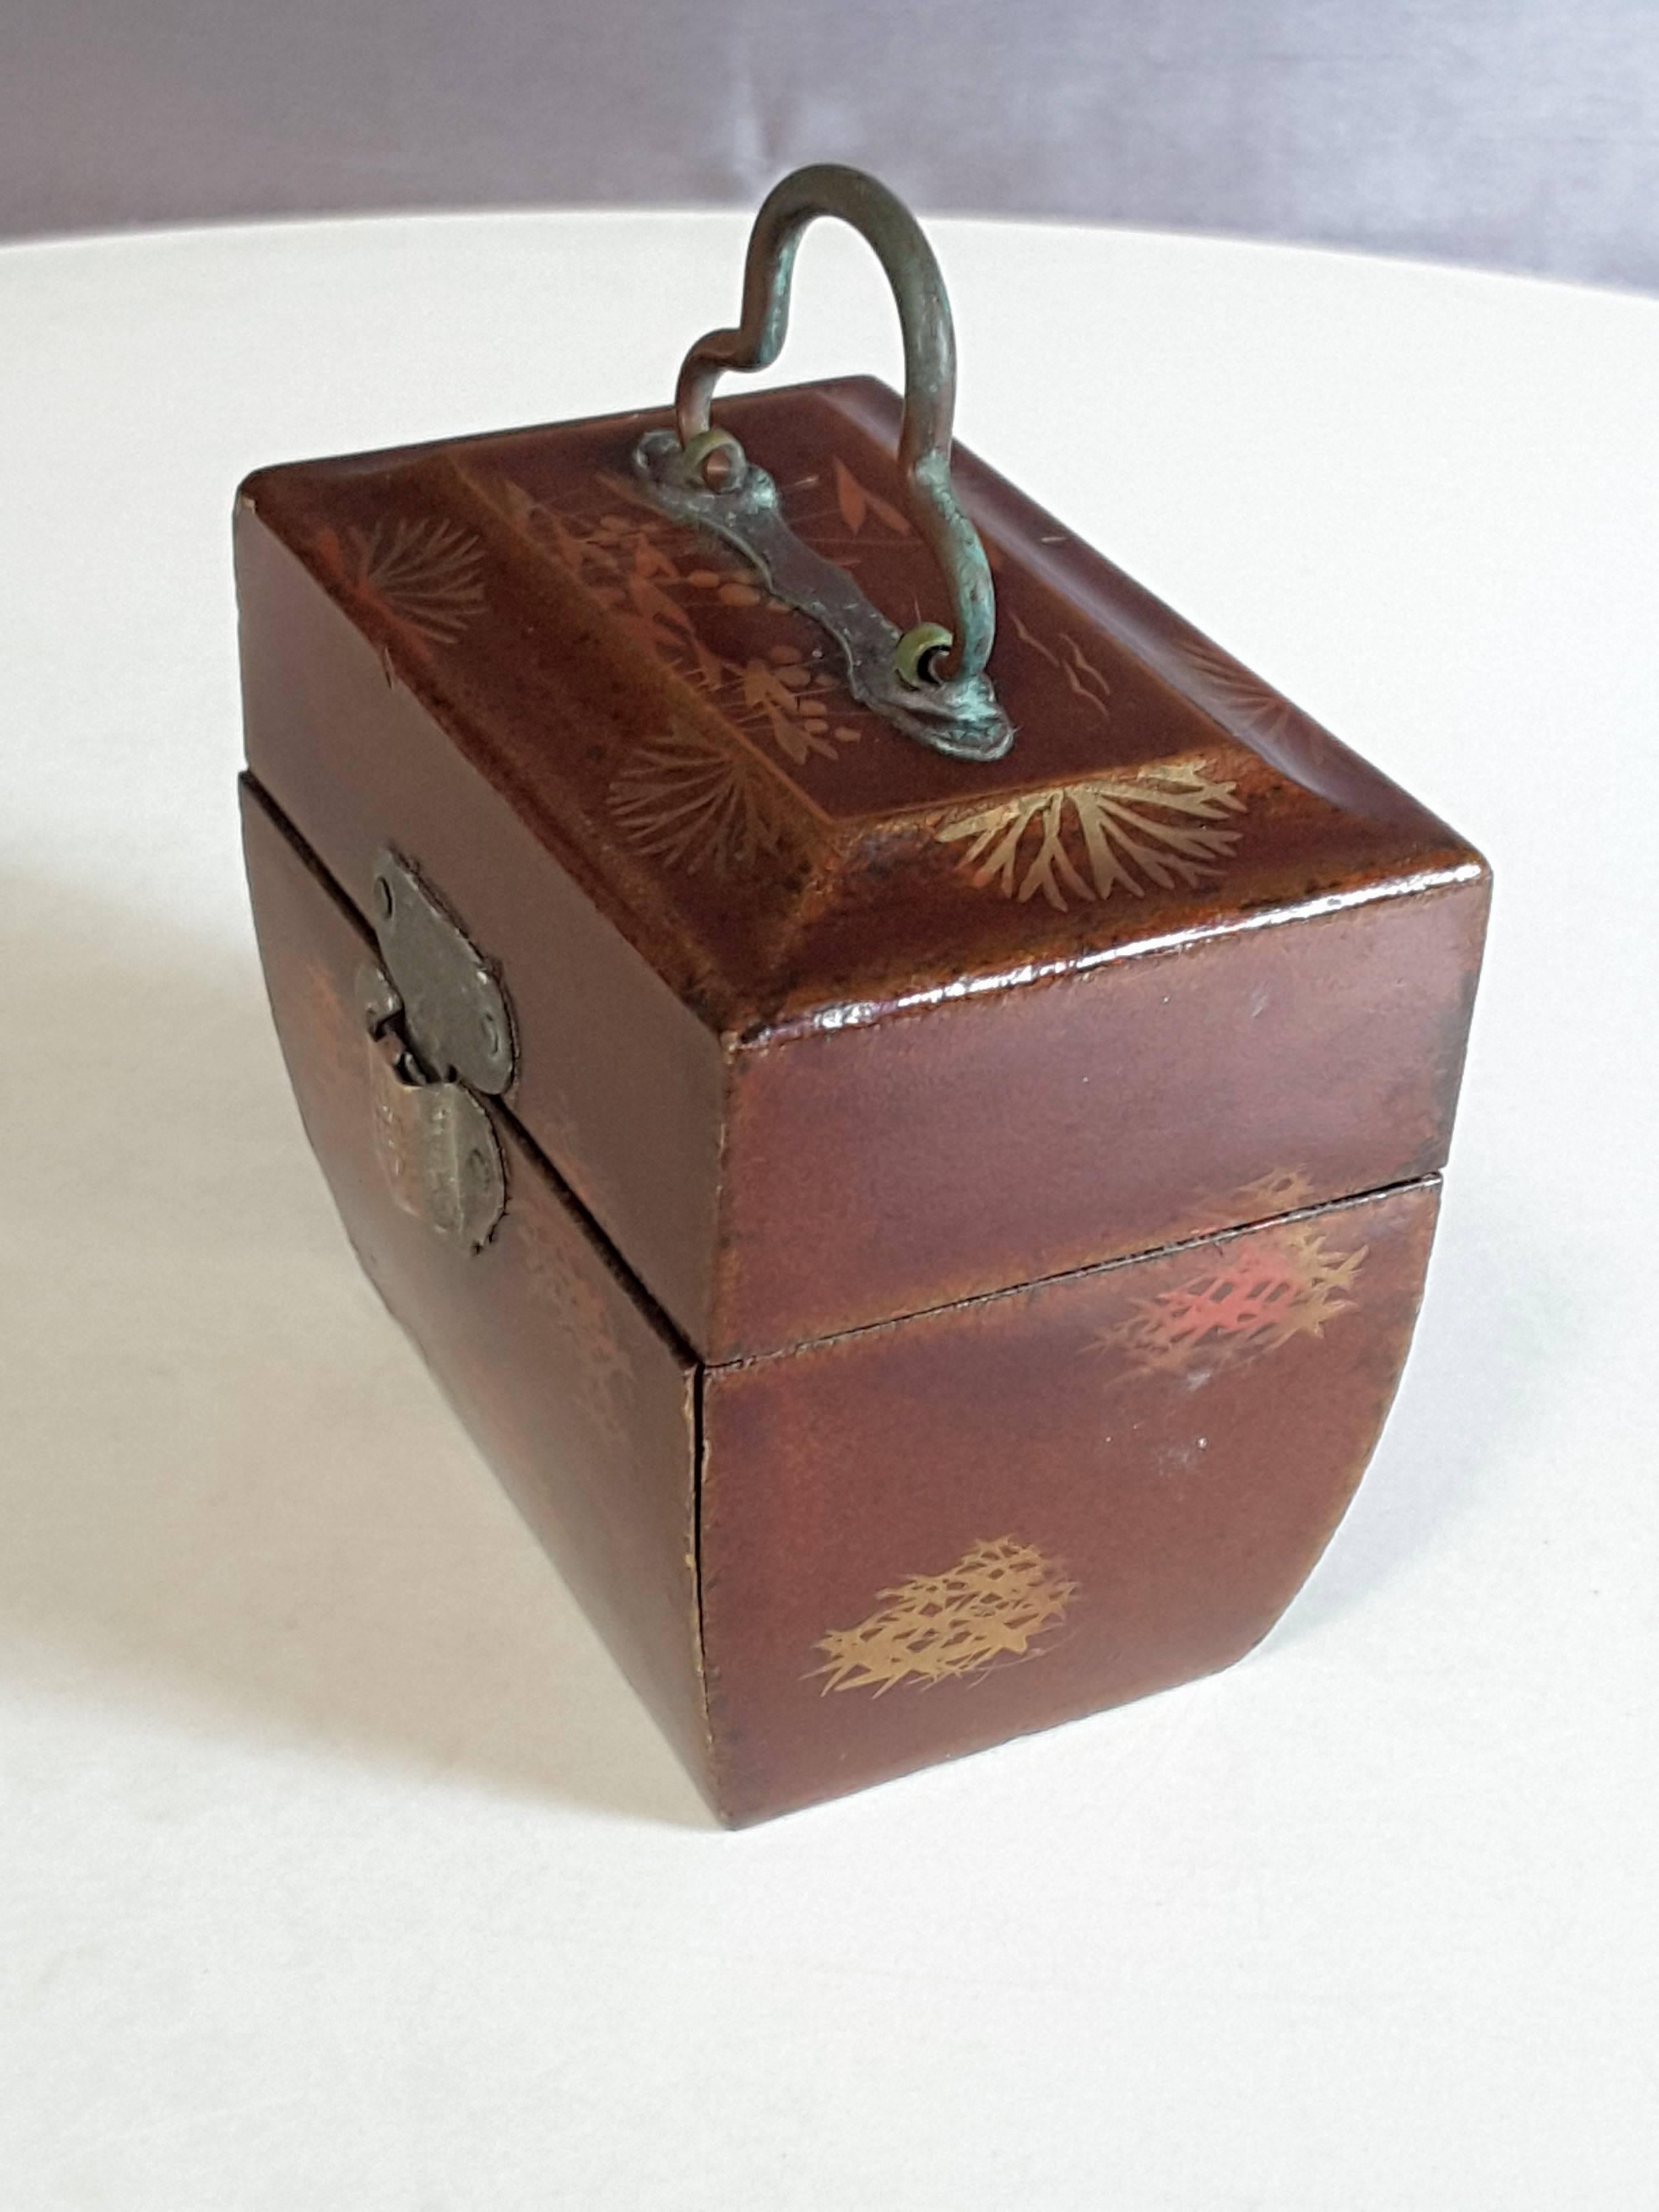 Miniature Chinese herb/medicinal fitted case with two glass bottles, the case is made of wood, light brown finish with gilt decoration and metal handle and clasps. The interior is blue felt lined and divided in two sections for glass bottles and